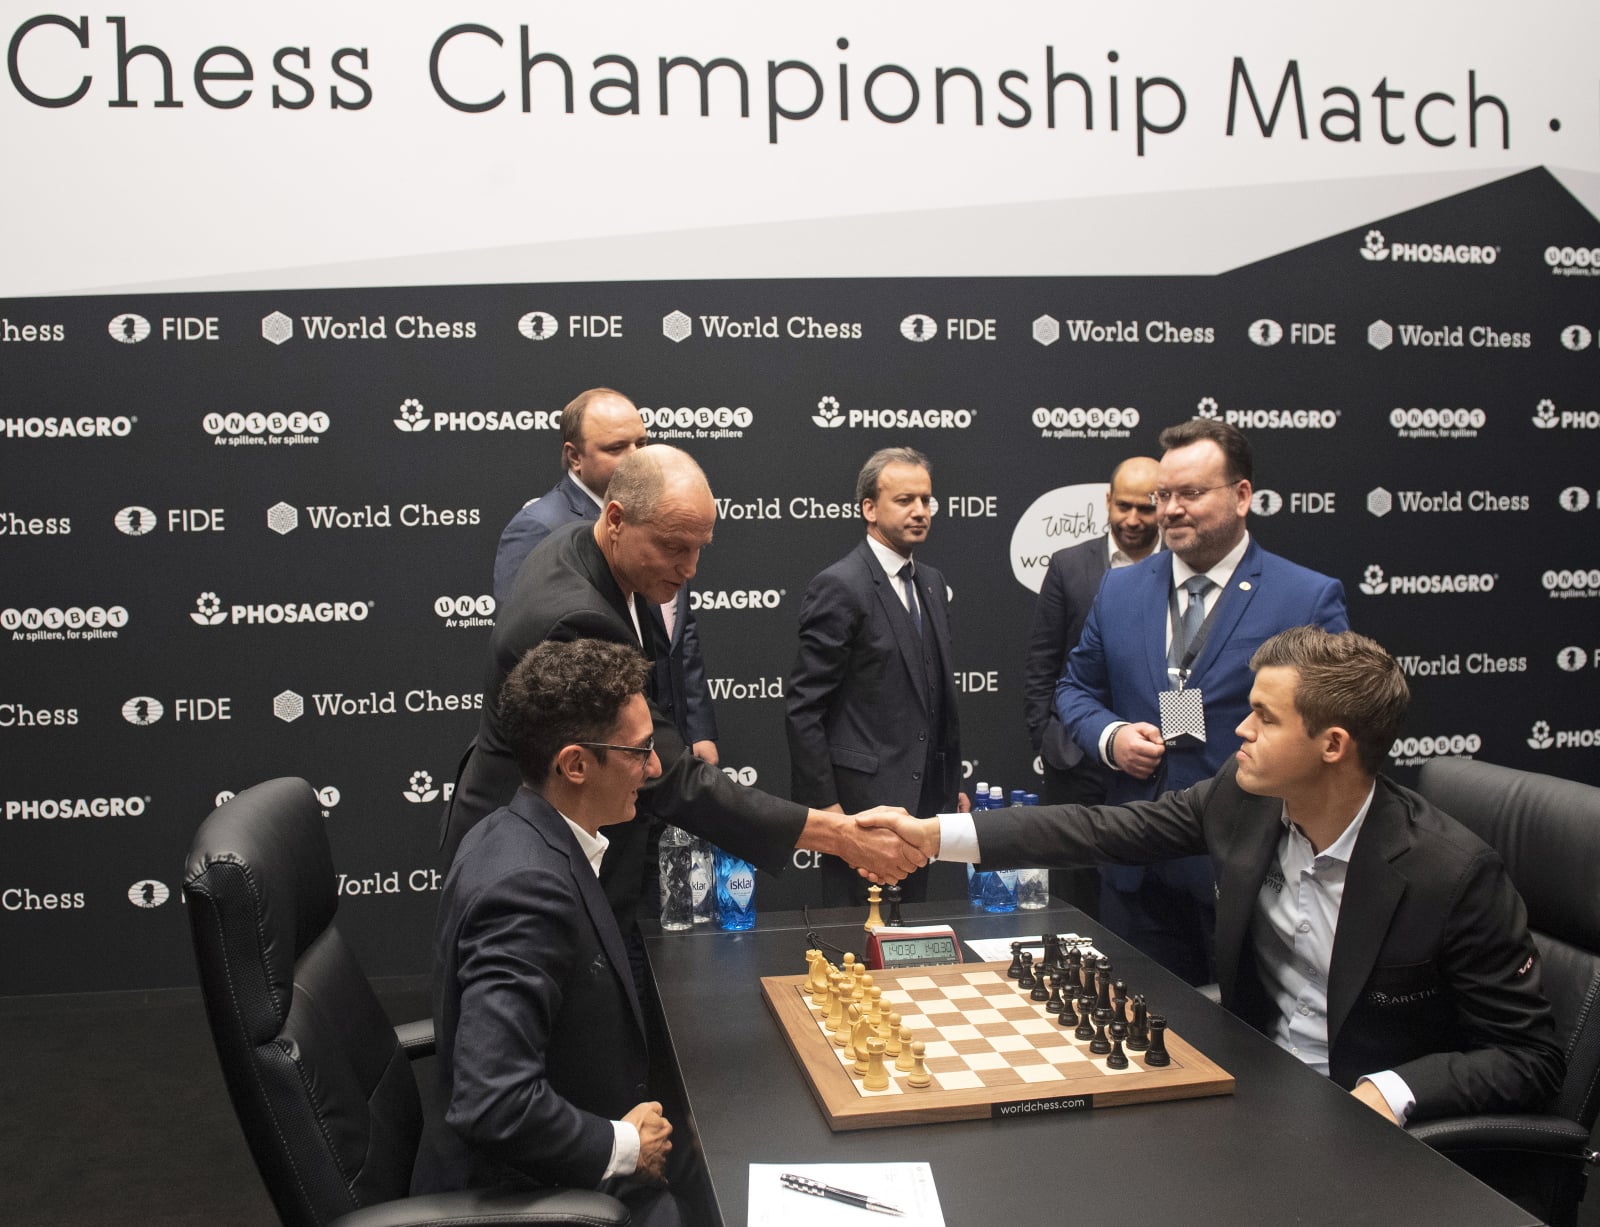 epa07154291 Norway's World Chess Champion Magnus Carlsen (R) shakes hand with US actor Woody Harrelson (2-L) after he accidentally knocked the White King before making the opening gambit move for US challenger Fabiano Caruana (seated L) of their Round One game during the World Chess Championship 2018, in London, Britain, 09 November 2018. Others are not identified  EPA/FACUNDO ARRIZABALAGA